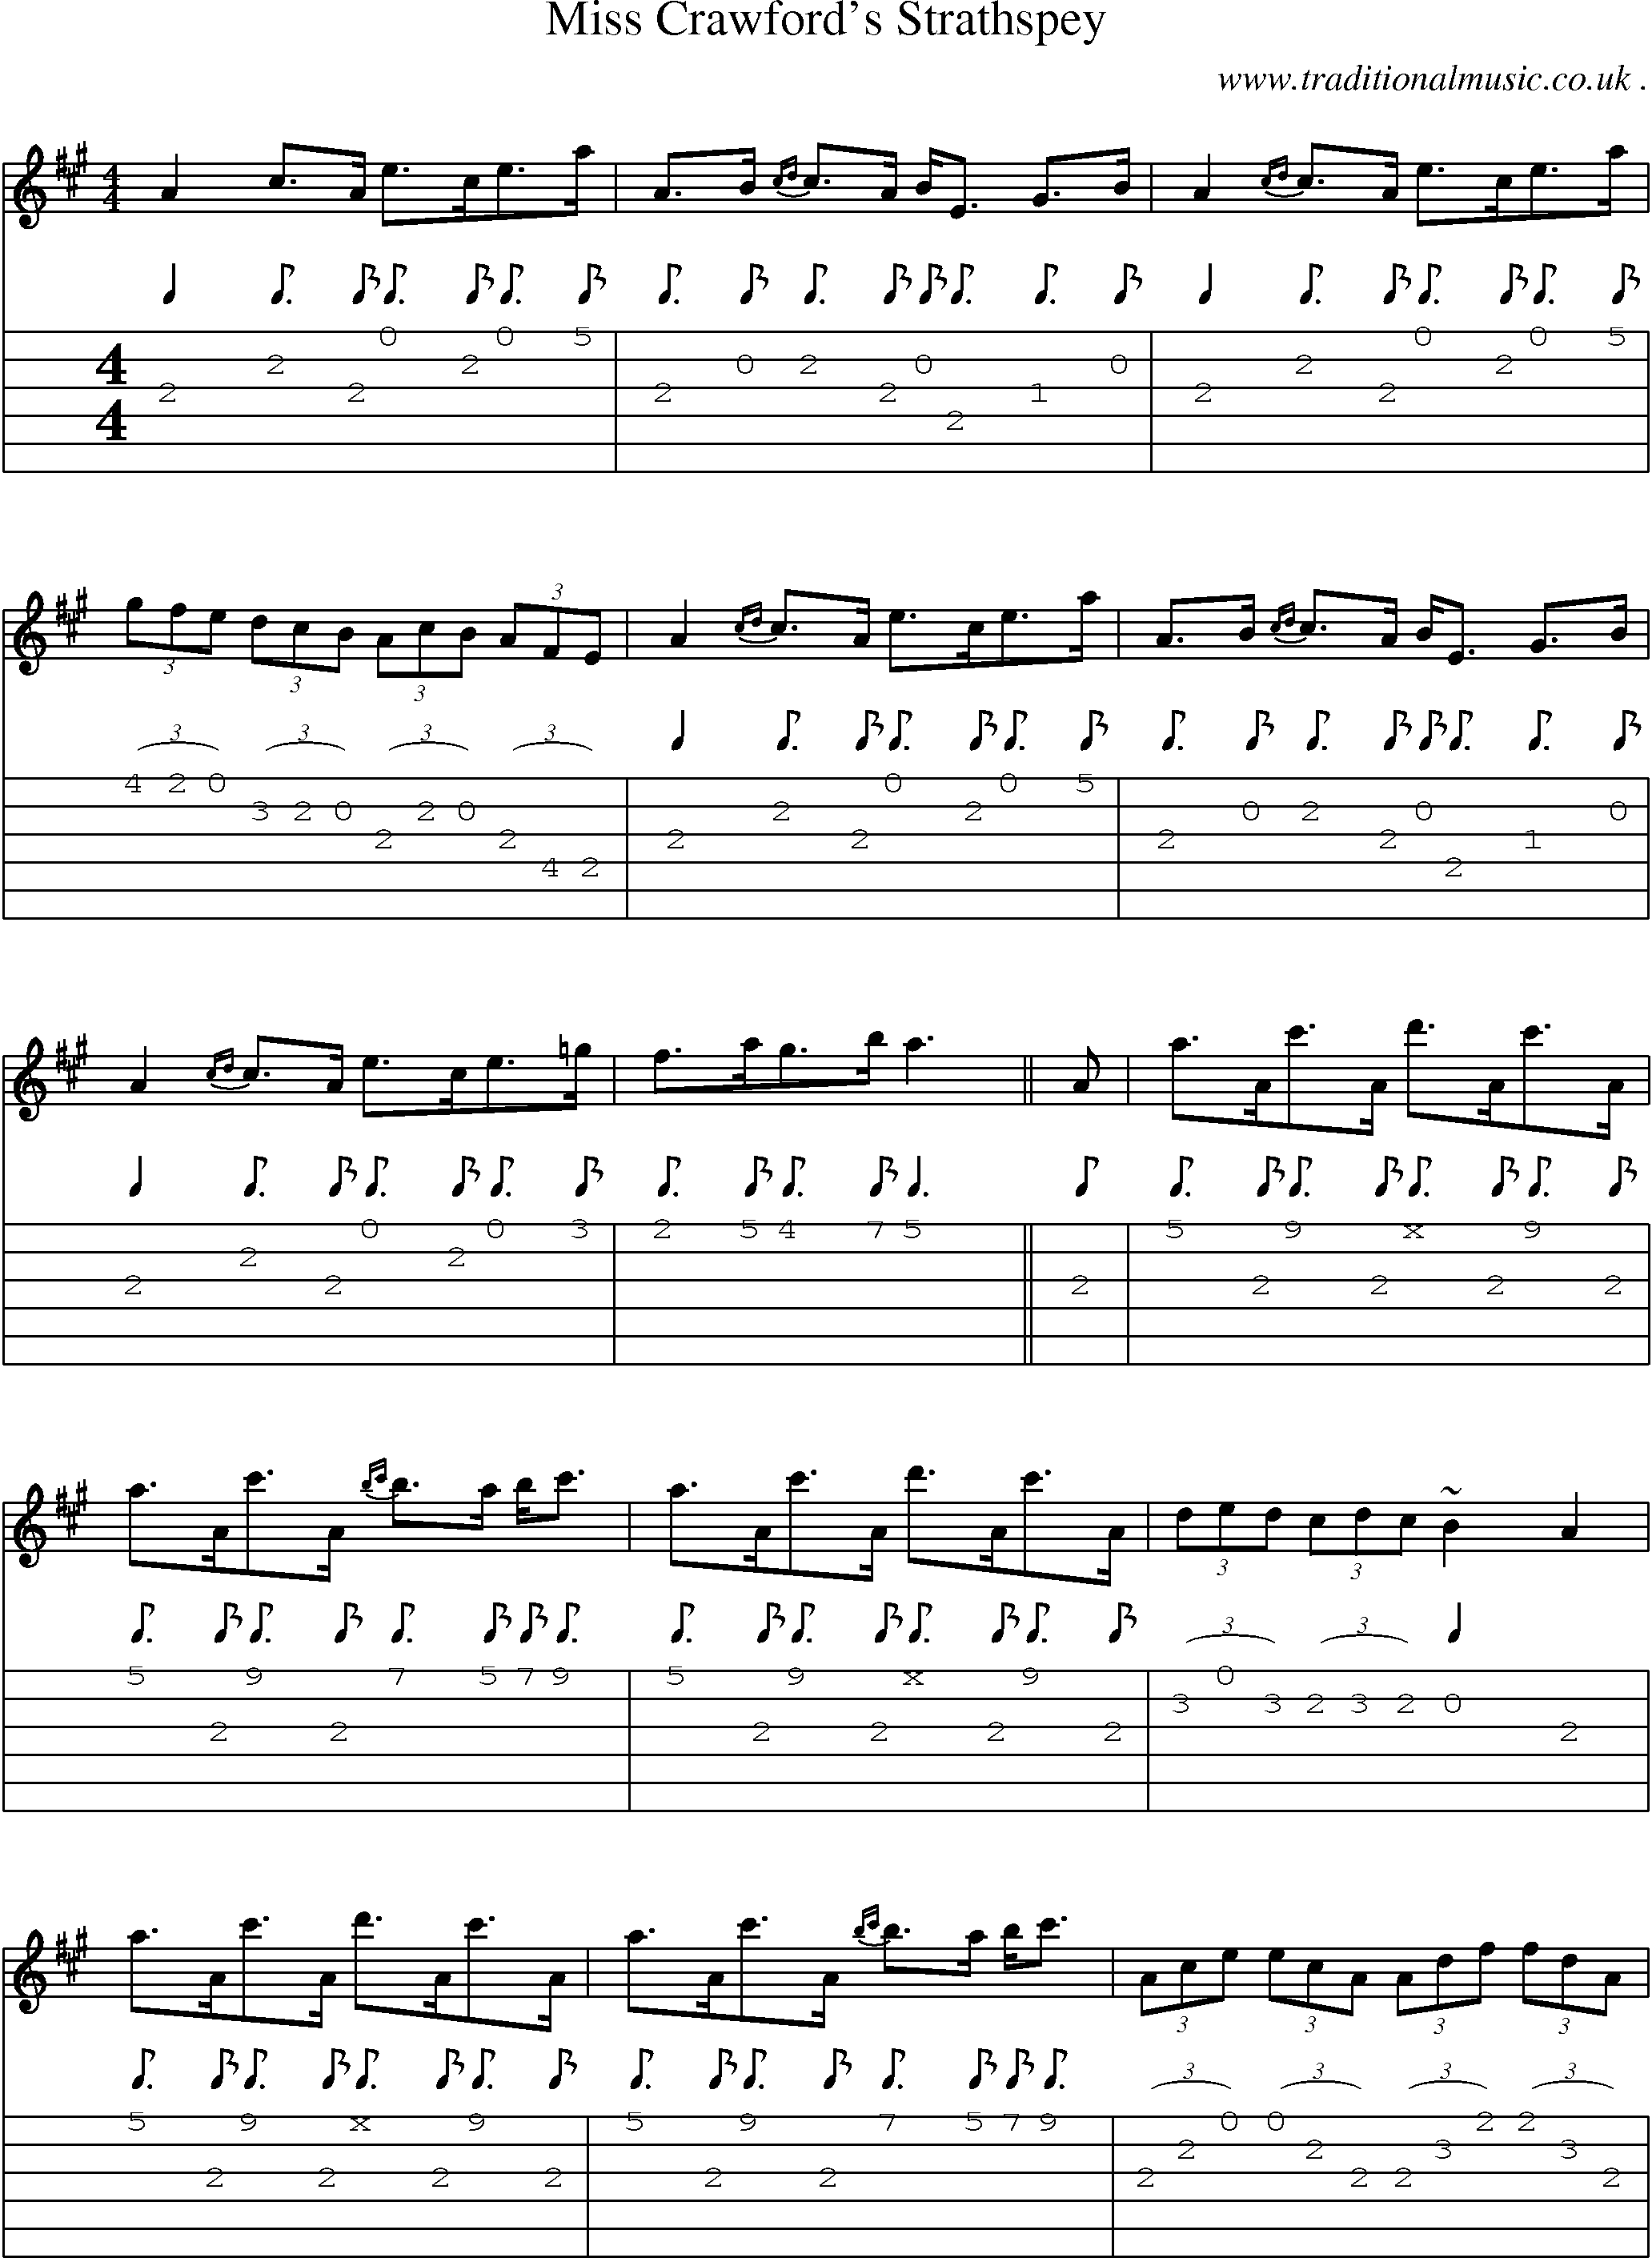 Sheet-music  score, Chords and Guitar Tabs for Miss Crawfords Strathspey